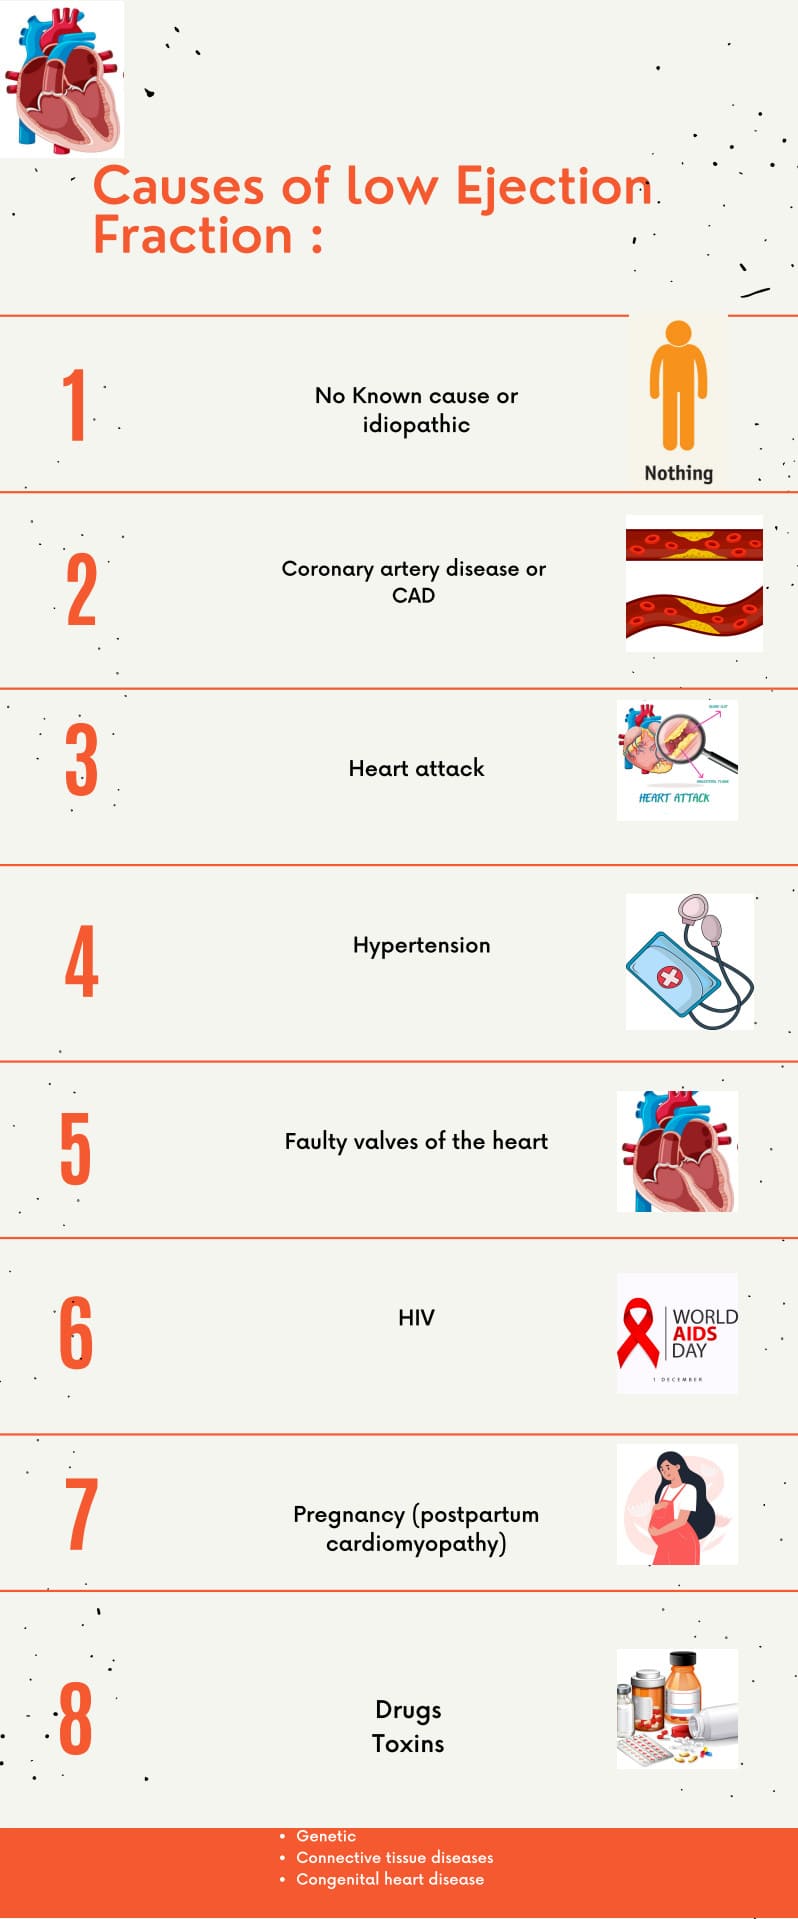 Causes of low ejection fraction